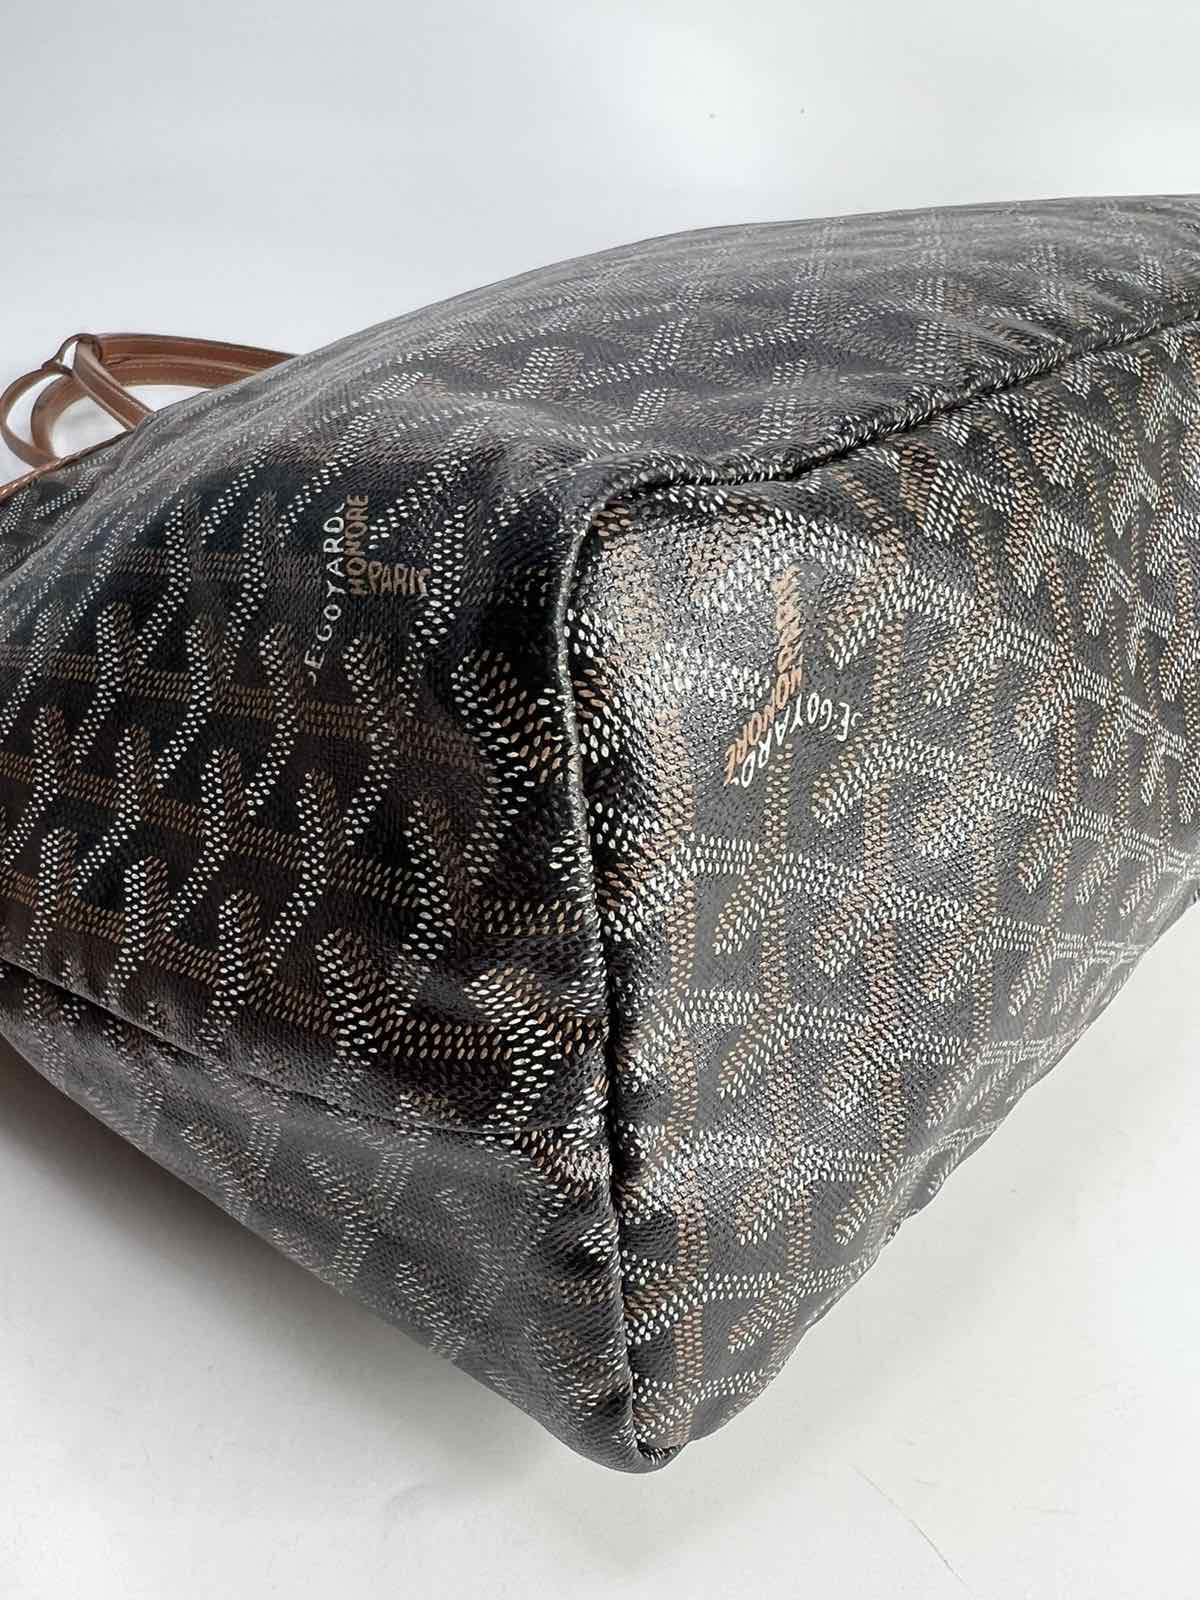 Goyard St. Louis Gray PM. Made in France. With tag, care card, pouch,  dustbag, paperbag & certificate of authenticity from ENTRUPY ❤️